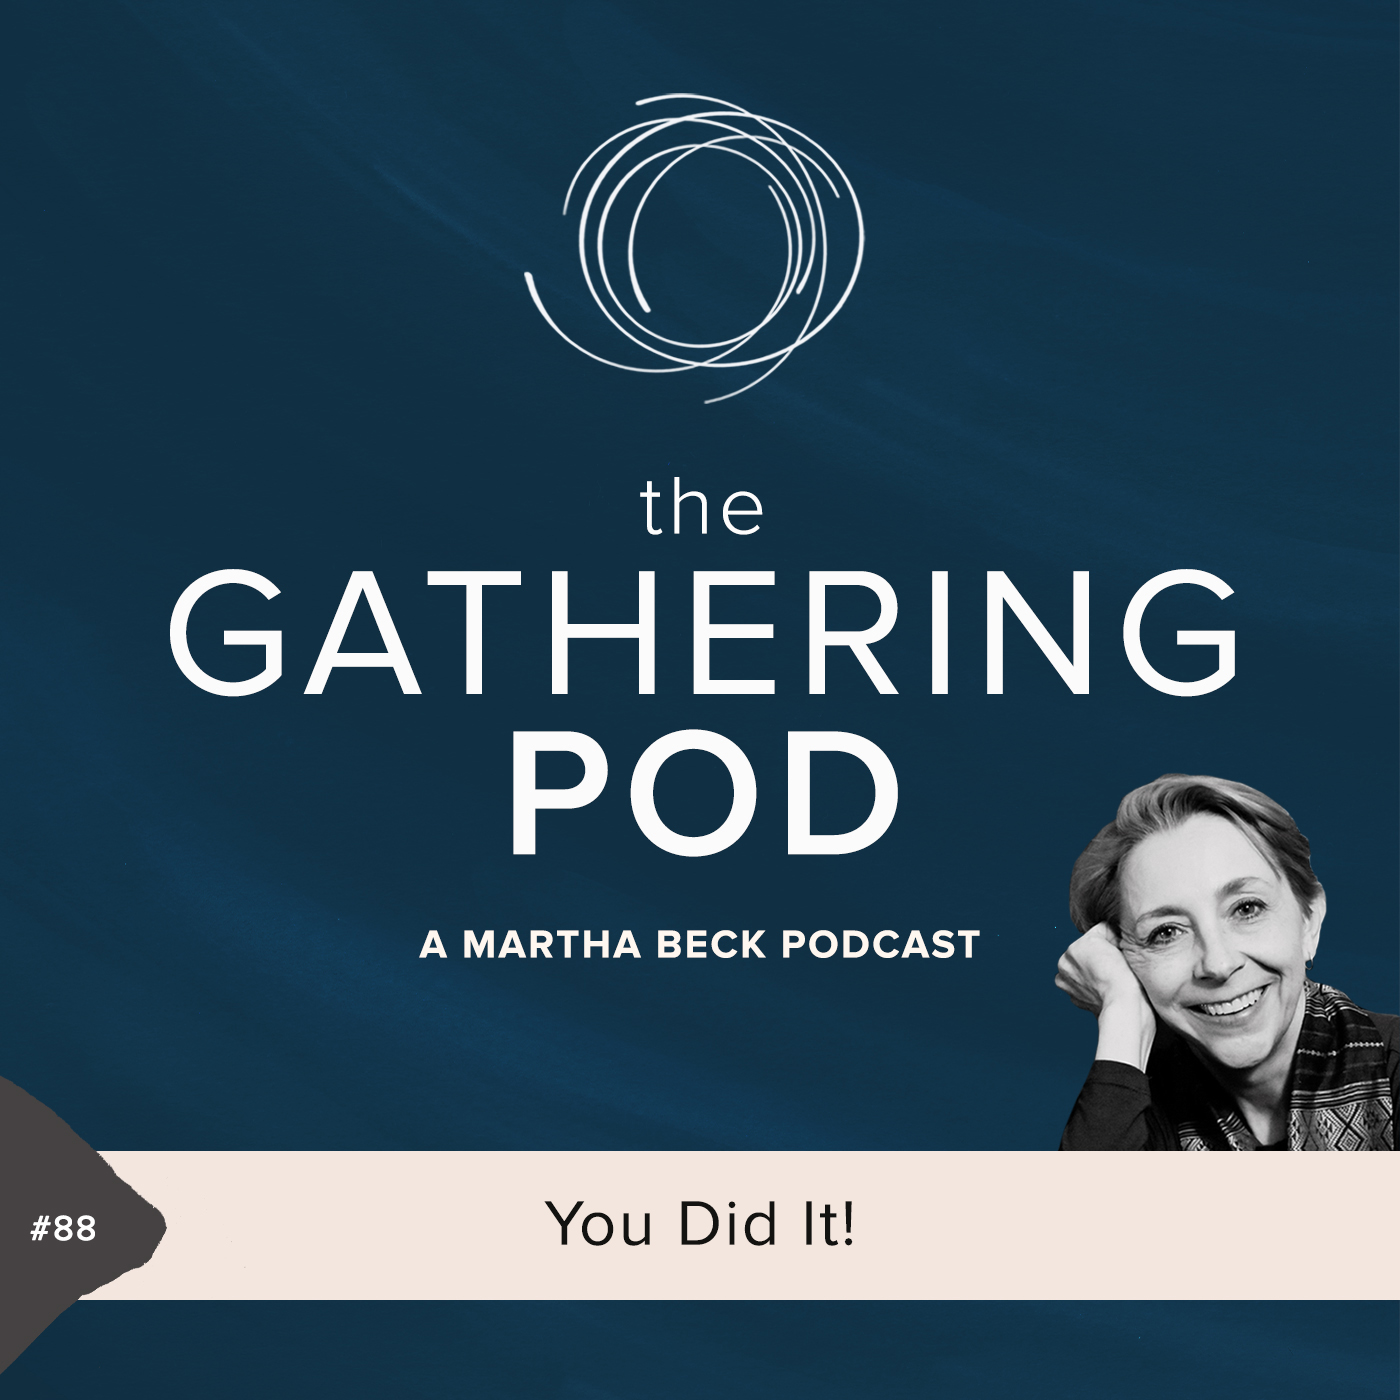 Image for The Gathering Pod A Martha Beck Podcast Episode #88 You Did it!